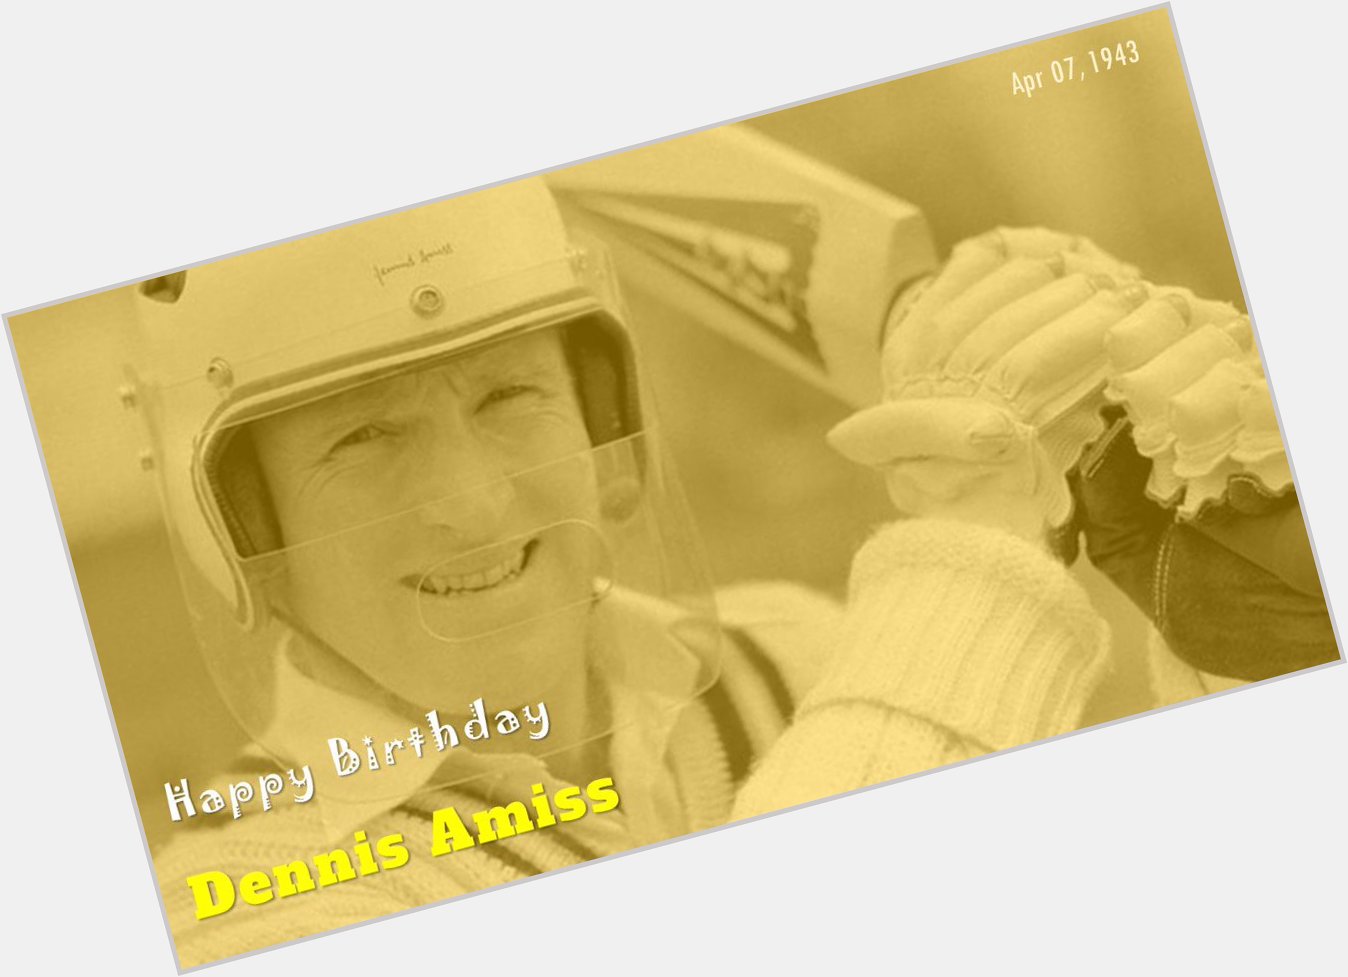 Happy Birthday, Dennis Amiss, the first man to score an ODI hundred   